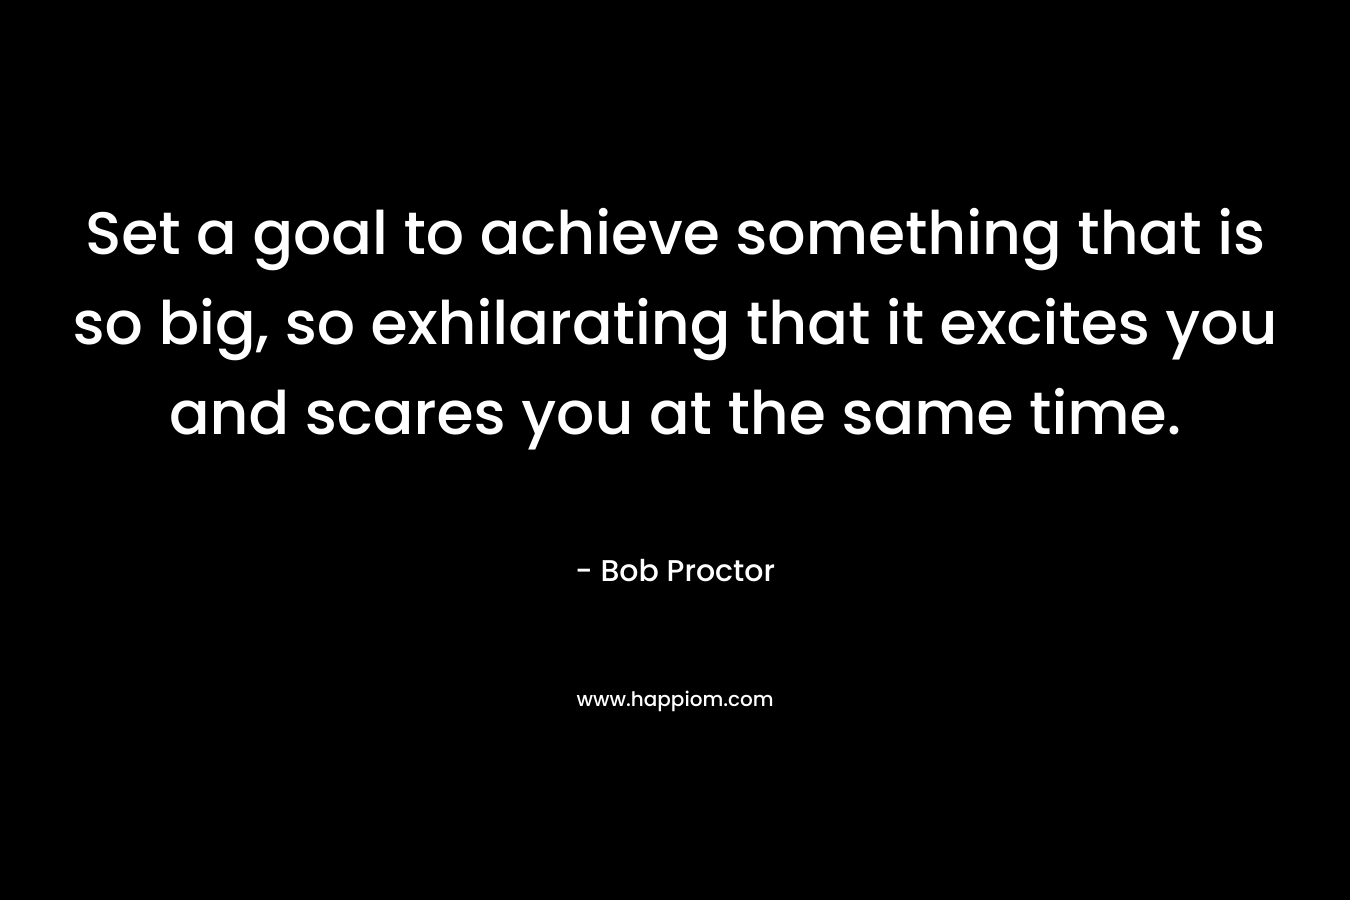 Set a goal to achieve something that is so big, so exhilarating that it excites you and scares you at the same time. – Bob Proctor